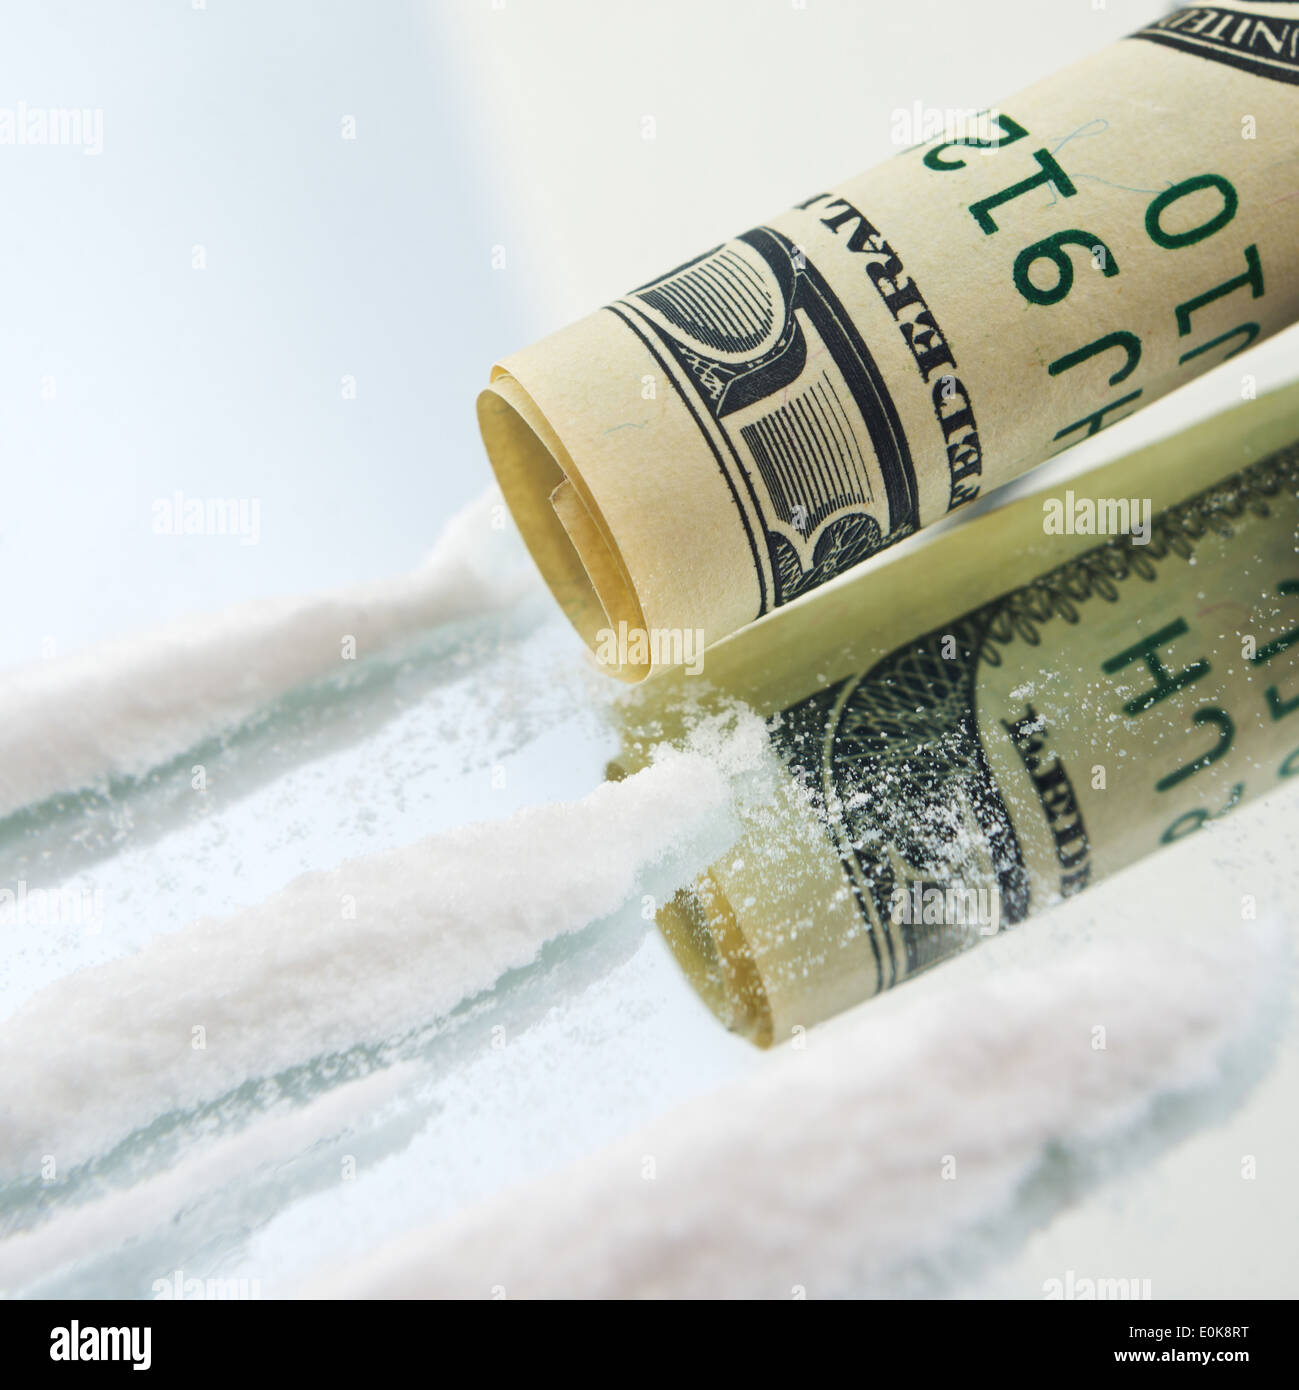 Cocaine drug powder lines and rolled up USA hundred dollar bill for sniffing. Drug addiction concept. Stock Photo